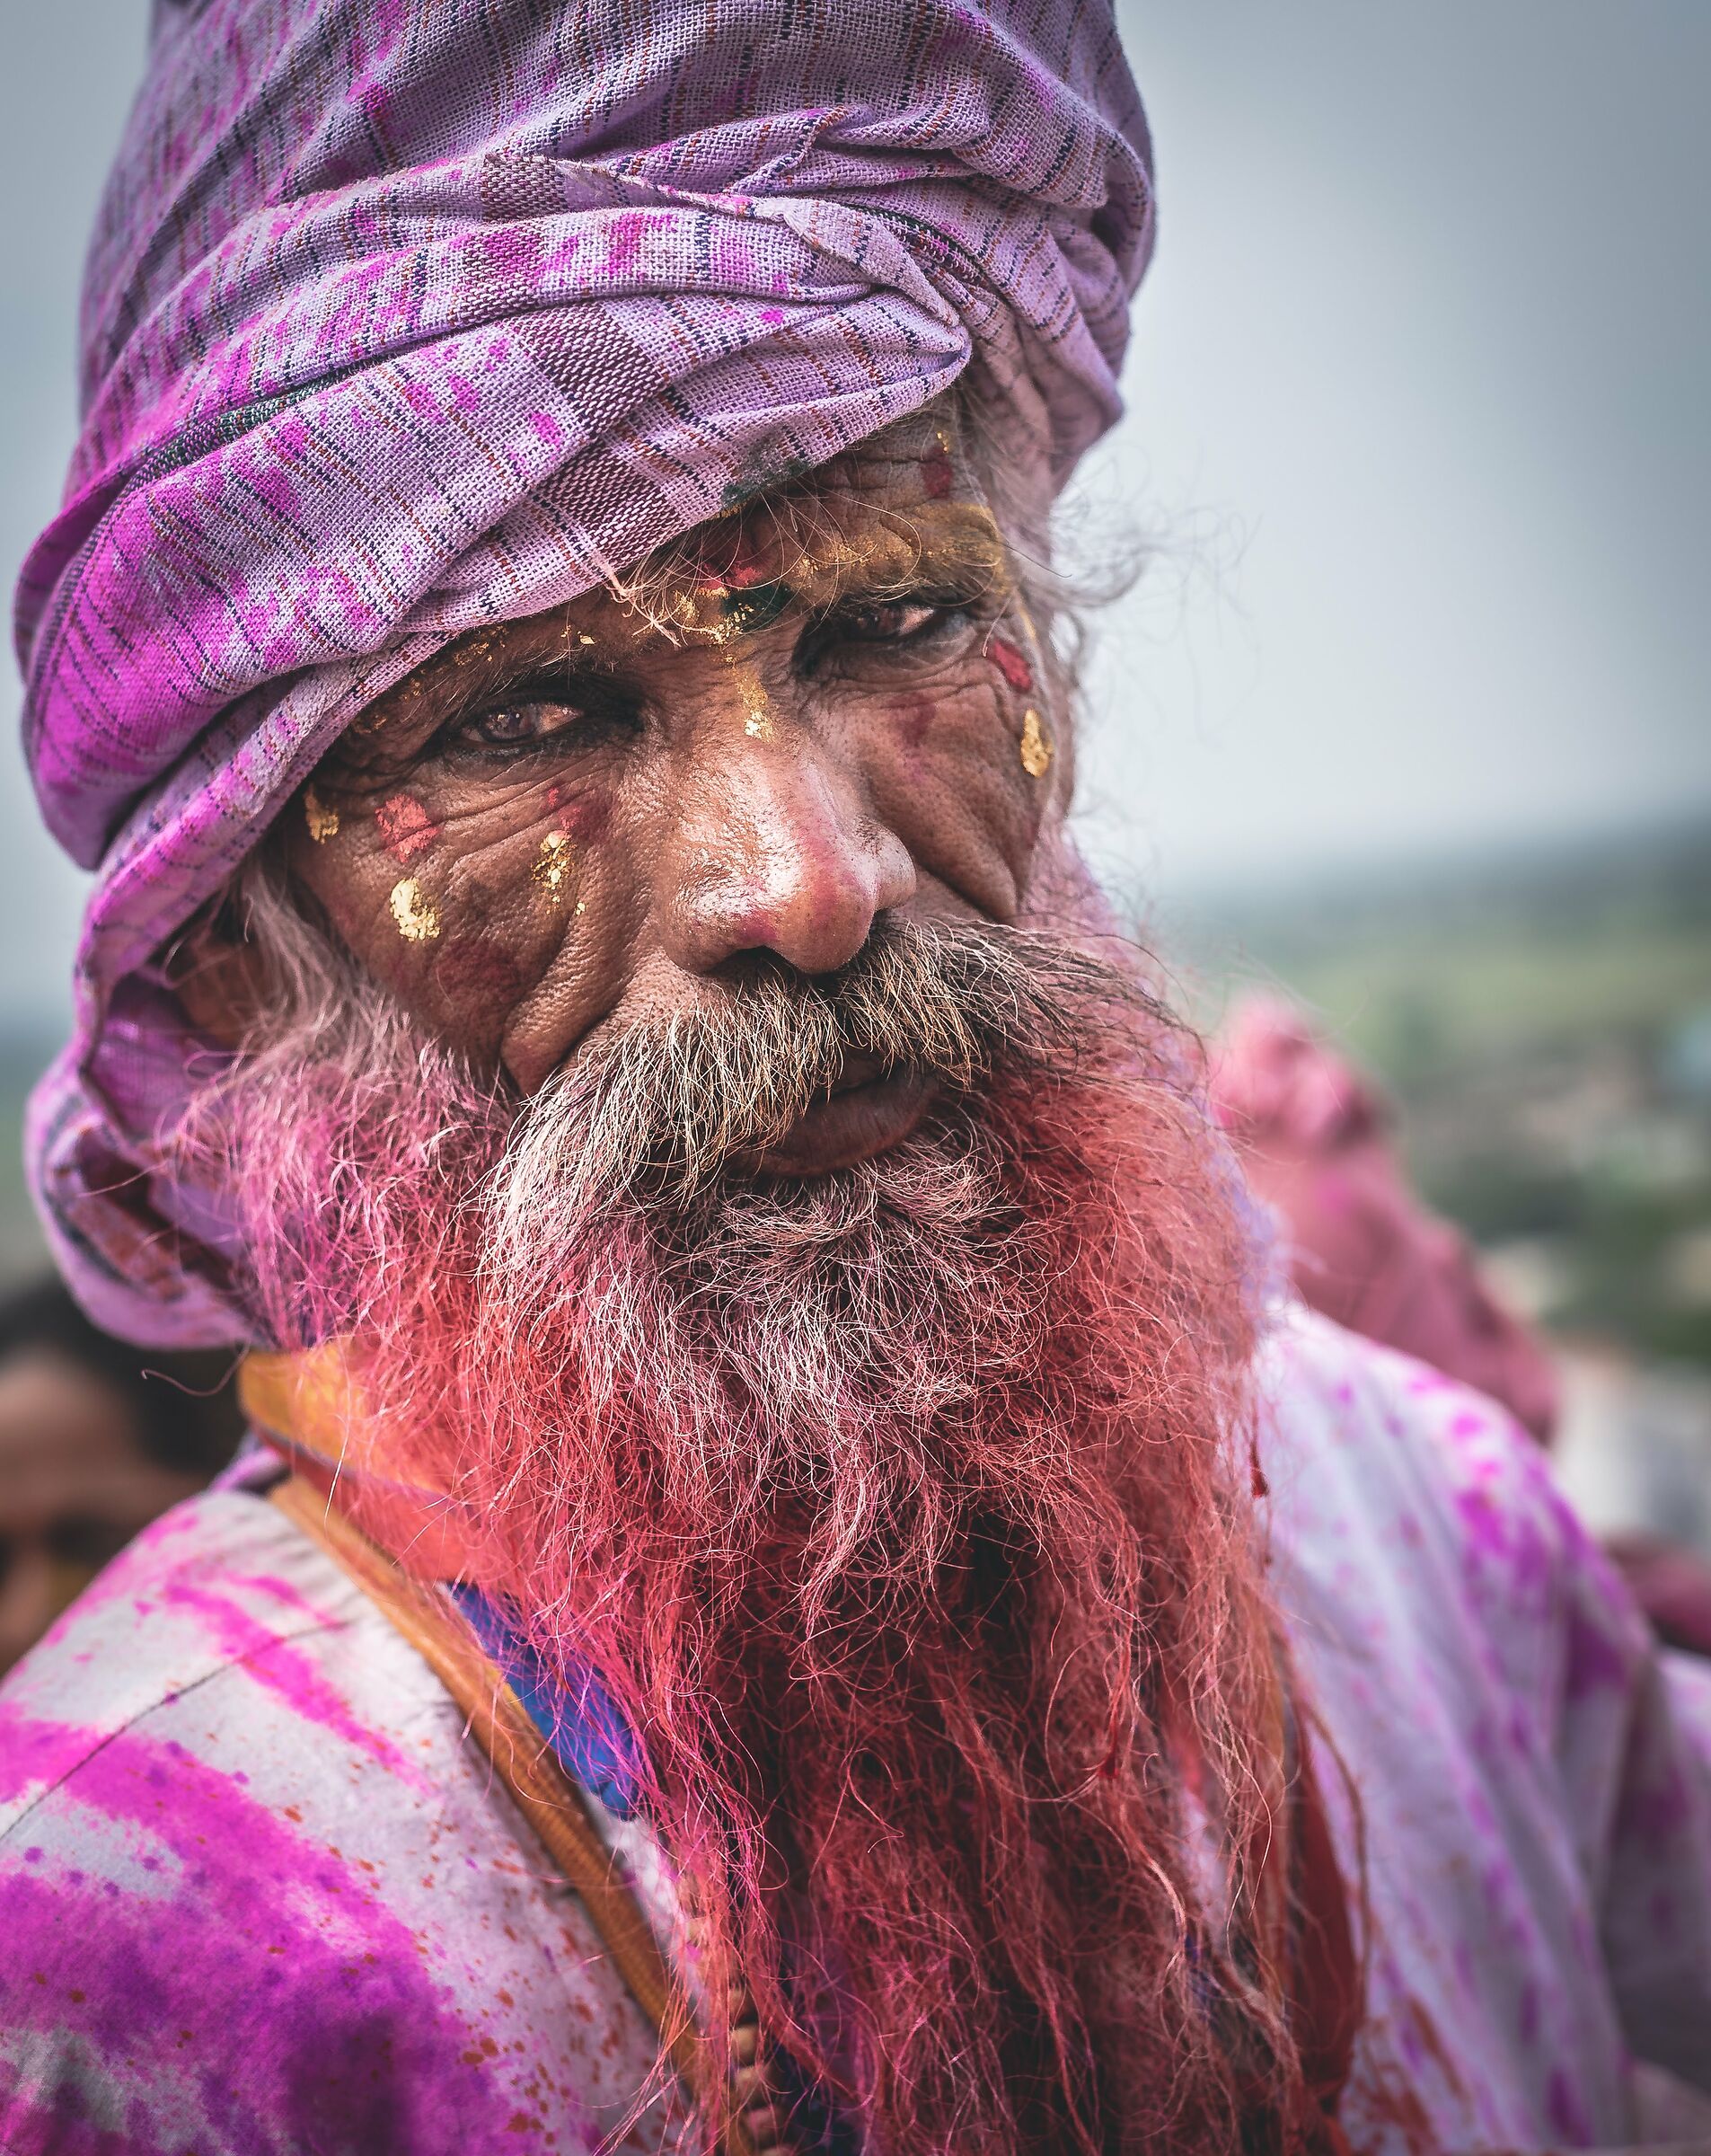 Holi festival, when madness becomes normal...